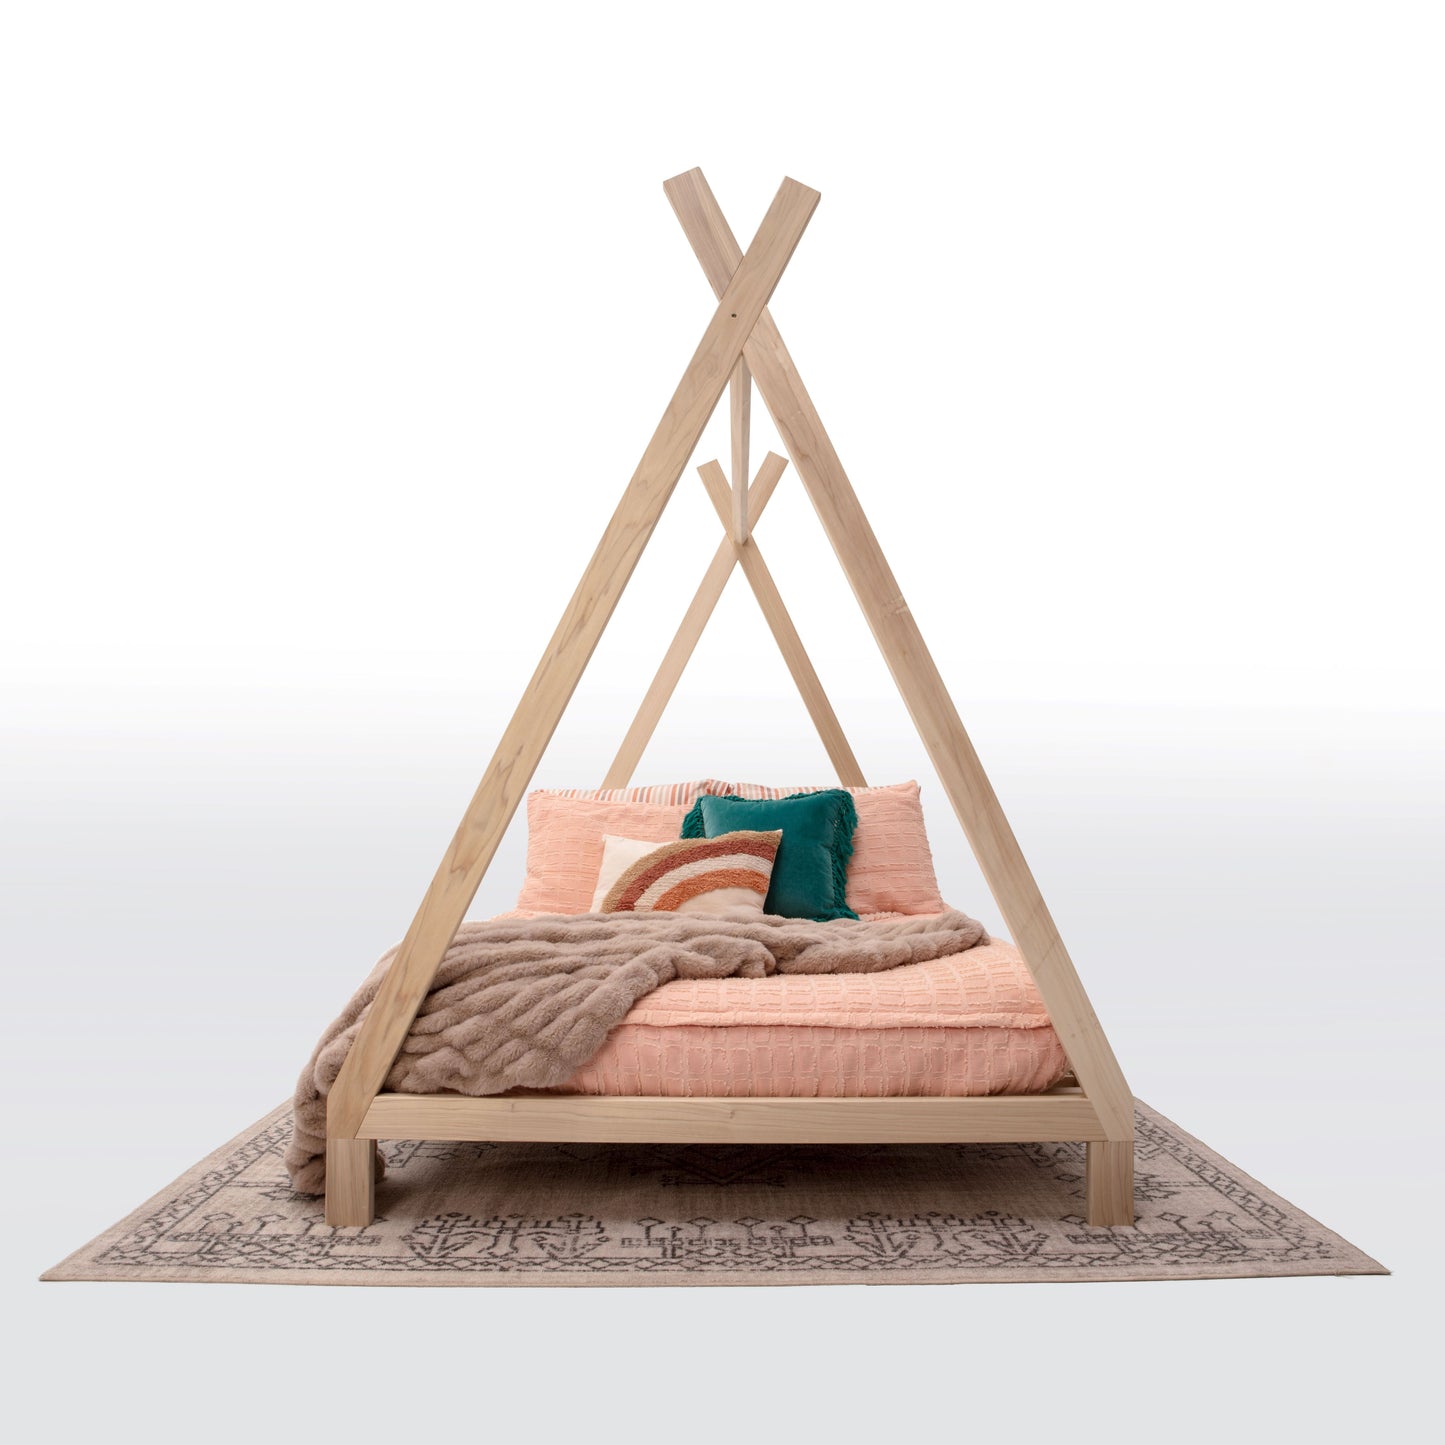 A charming toddler teepee bed crafted entirely from sturdy wood, resembling a miniature teepee structure. The bed's frame features natural wood tones with smooth, rounded edges for safety. Inside the teepee, a soft mattress with cozy bedding beckons, while the open design allows for imaginative play and a sense of adventure. Placed in a room adorned with playful decorations, this bed invites young ones to embark on a whimsical journey of sleep and play.